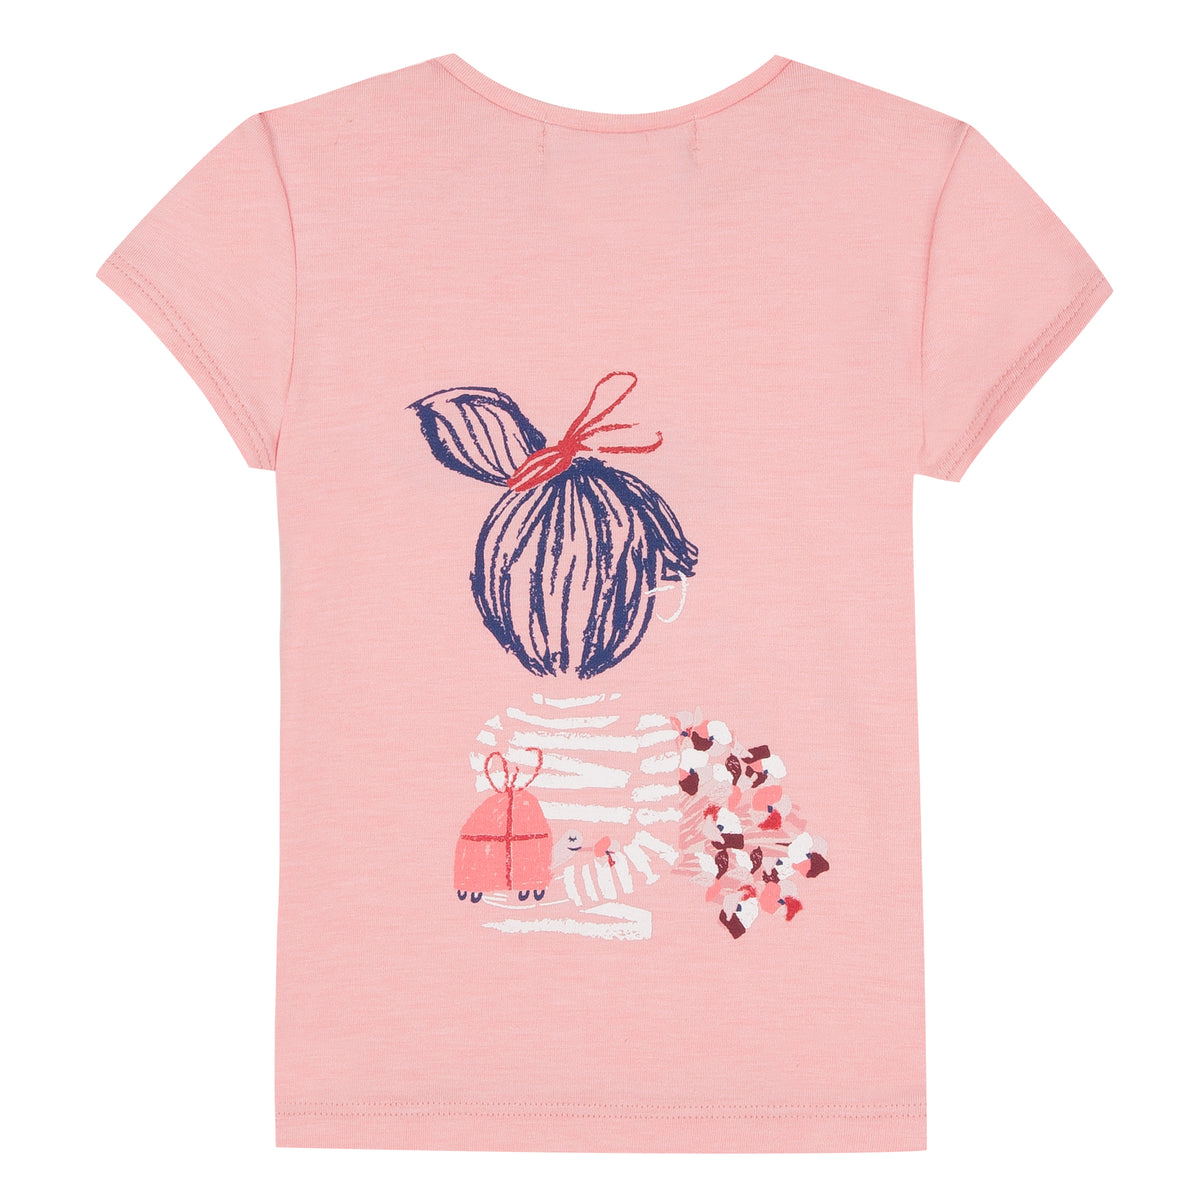 Jean Bourget short-sleeved cotton jersey T-shirt is printed with a pattern that extends into the back of a girl holding a bouquet of flowers in her hand.